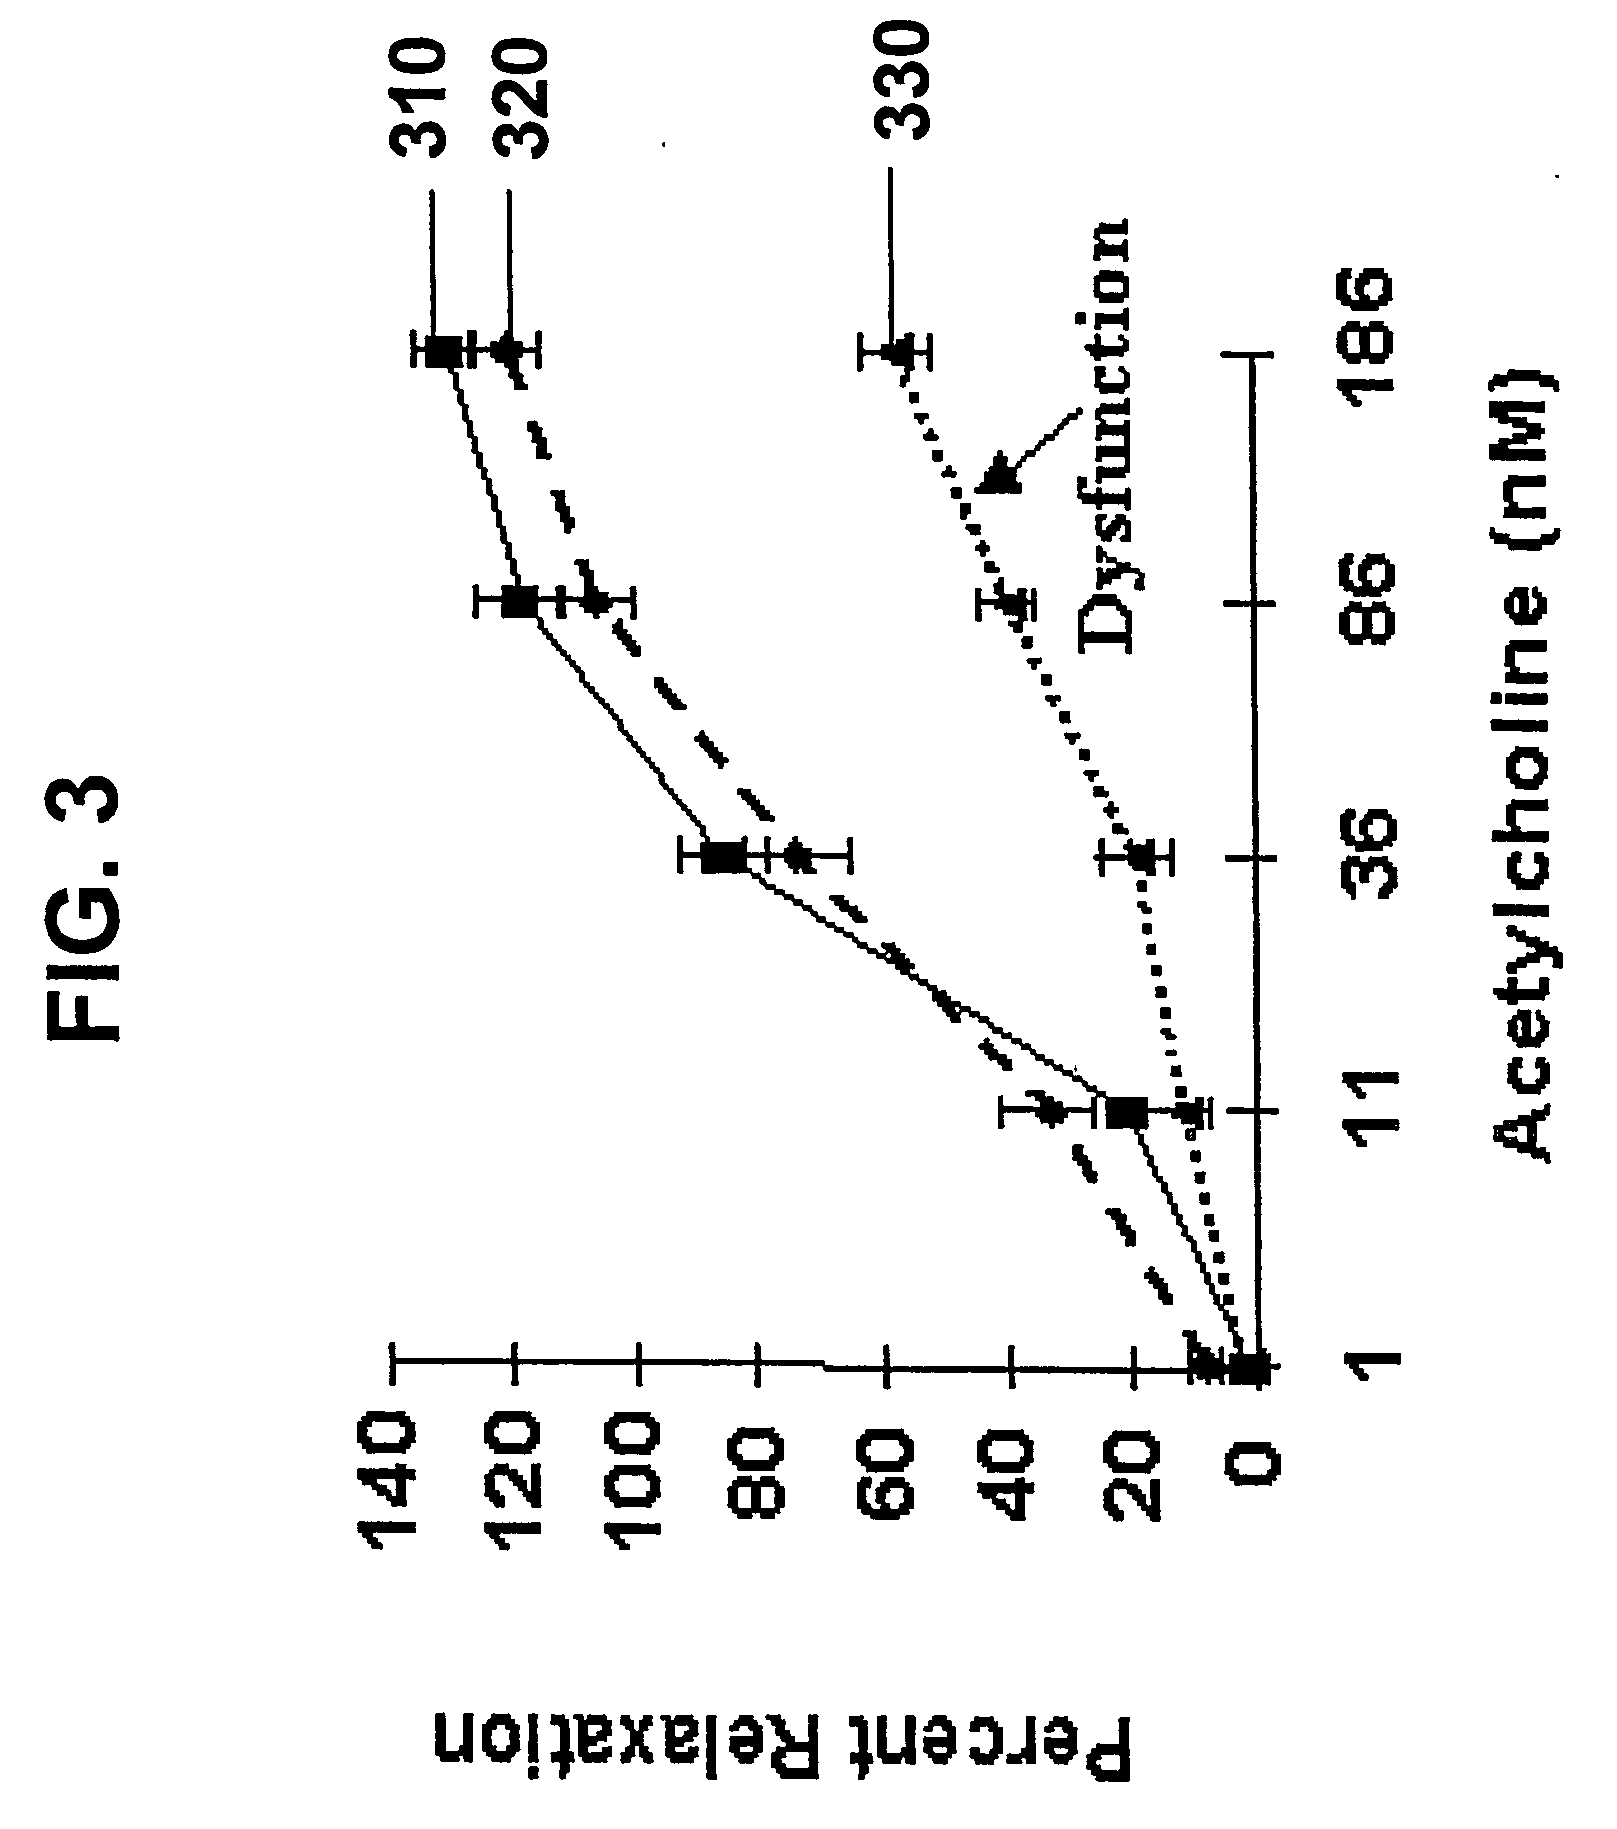 Compositions and methods for use of a protease inhibitor and adenosine for preventing organ ischemia and reperfusion injury